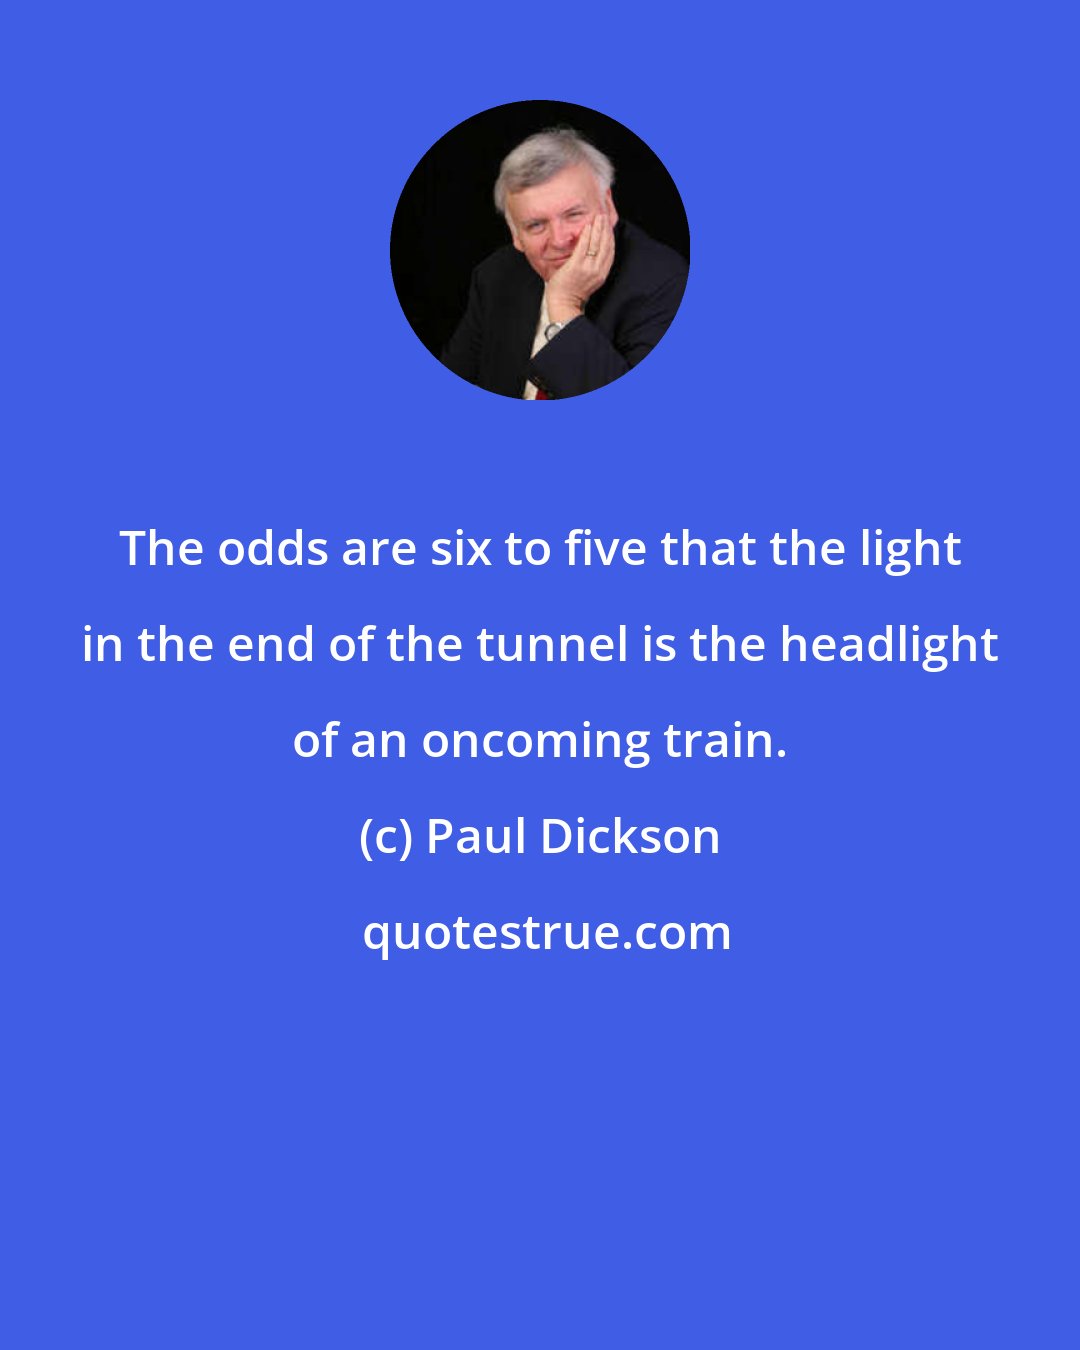 Paul Dickson: The odds are six to five that the light in the end of the tunnel is the headlight of an oncoming train.